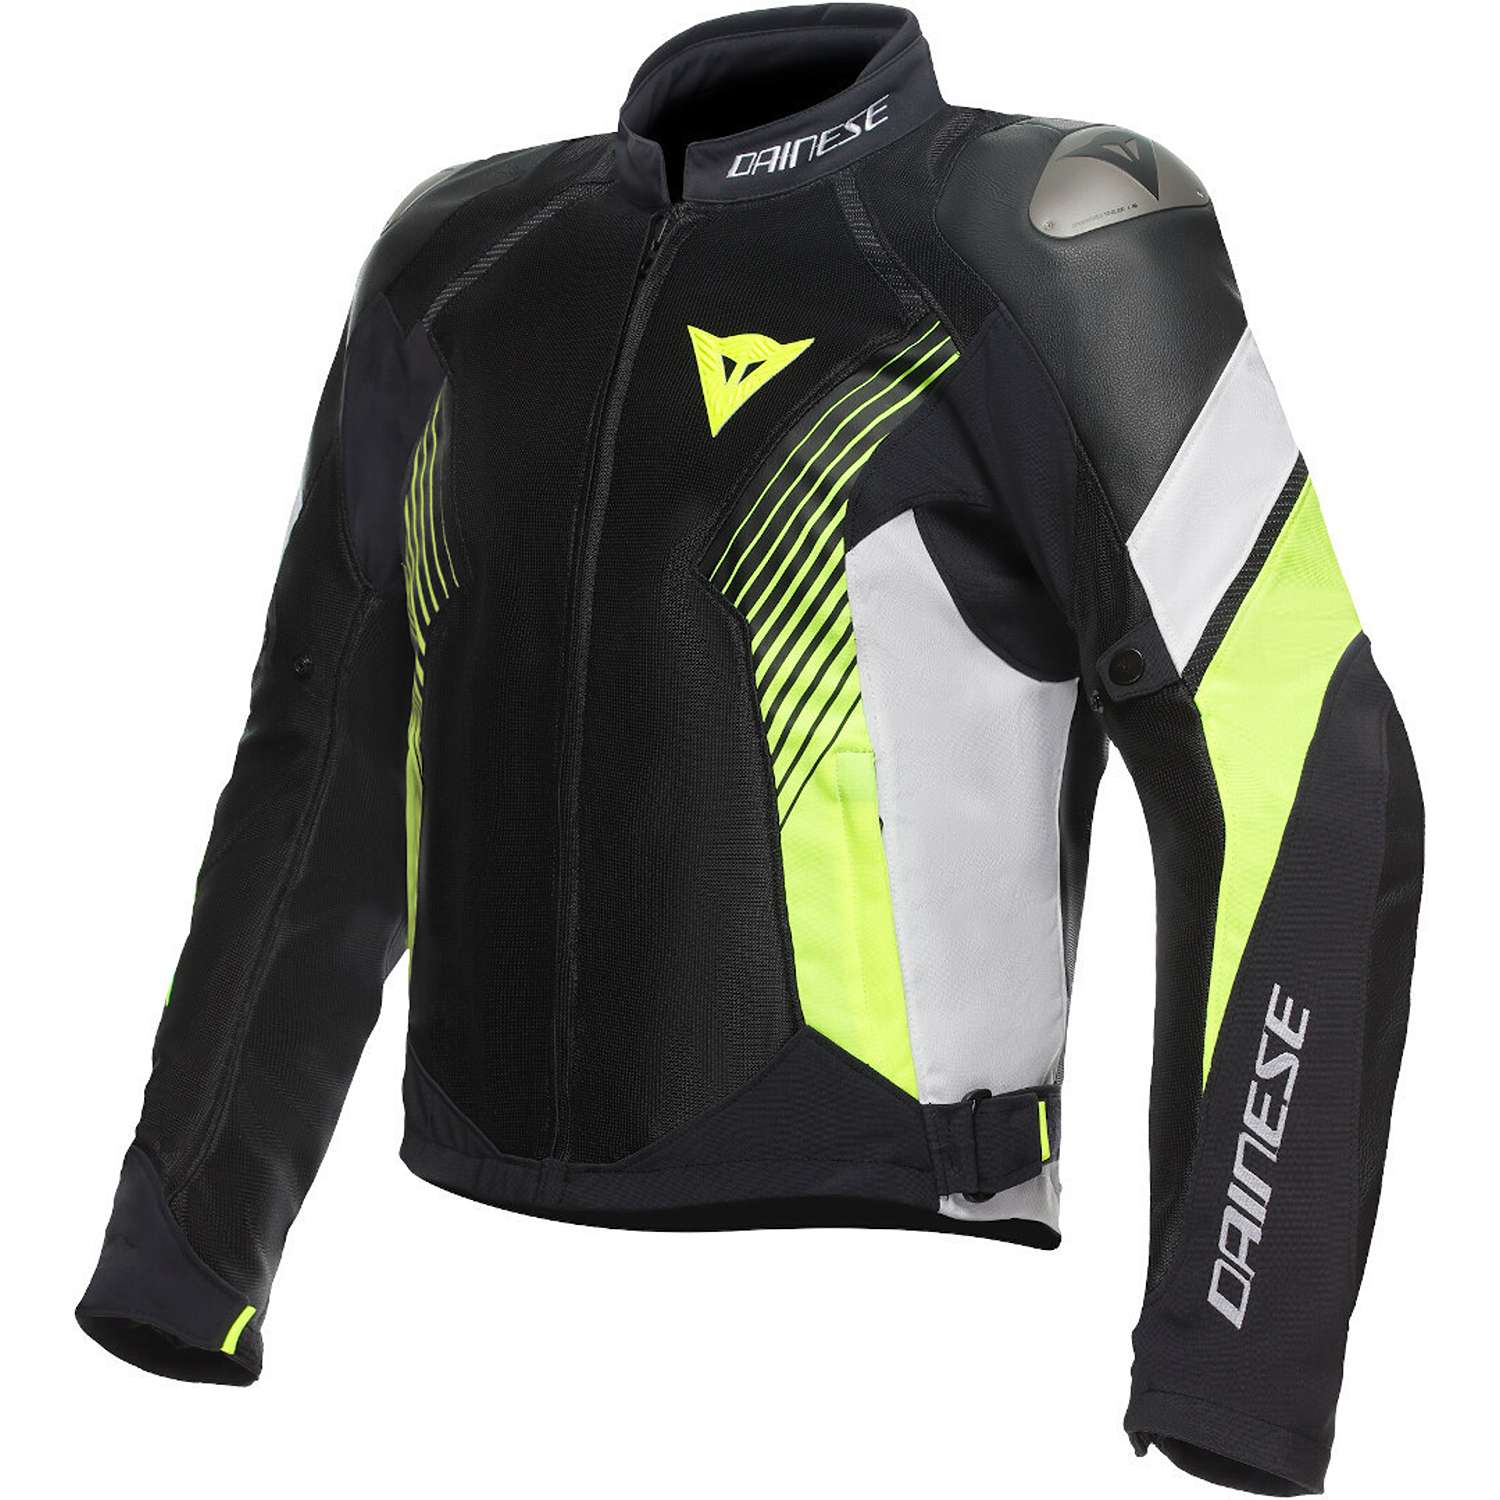 Image of Dainese Super Rider 2 Absoluteshell Jacket Black White Fluo Yellow Talla 52